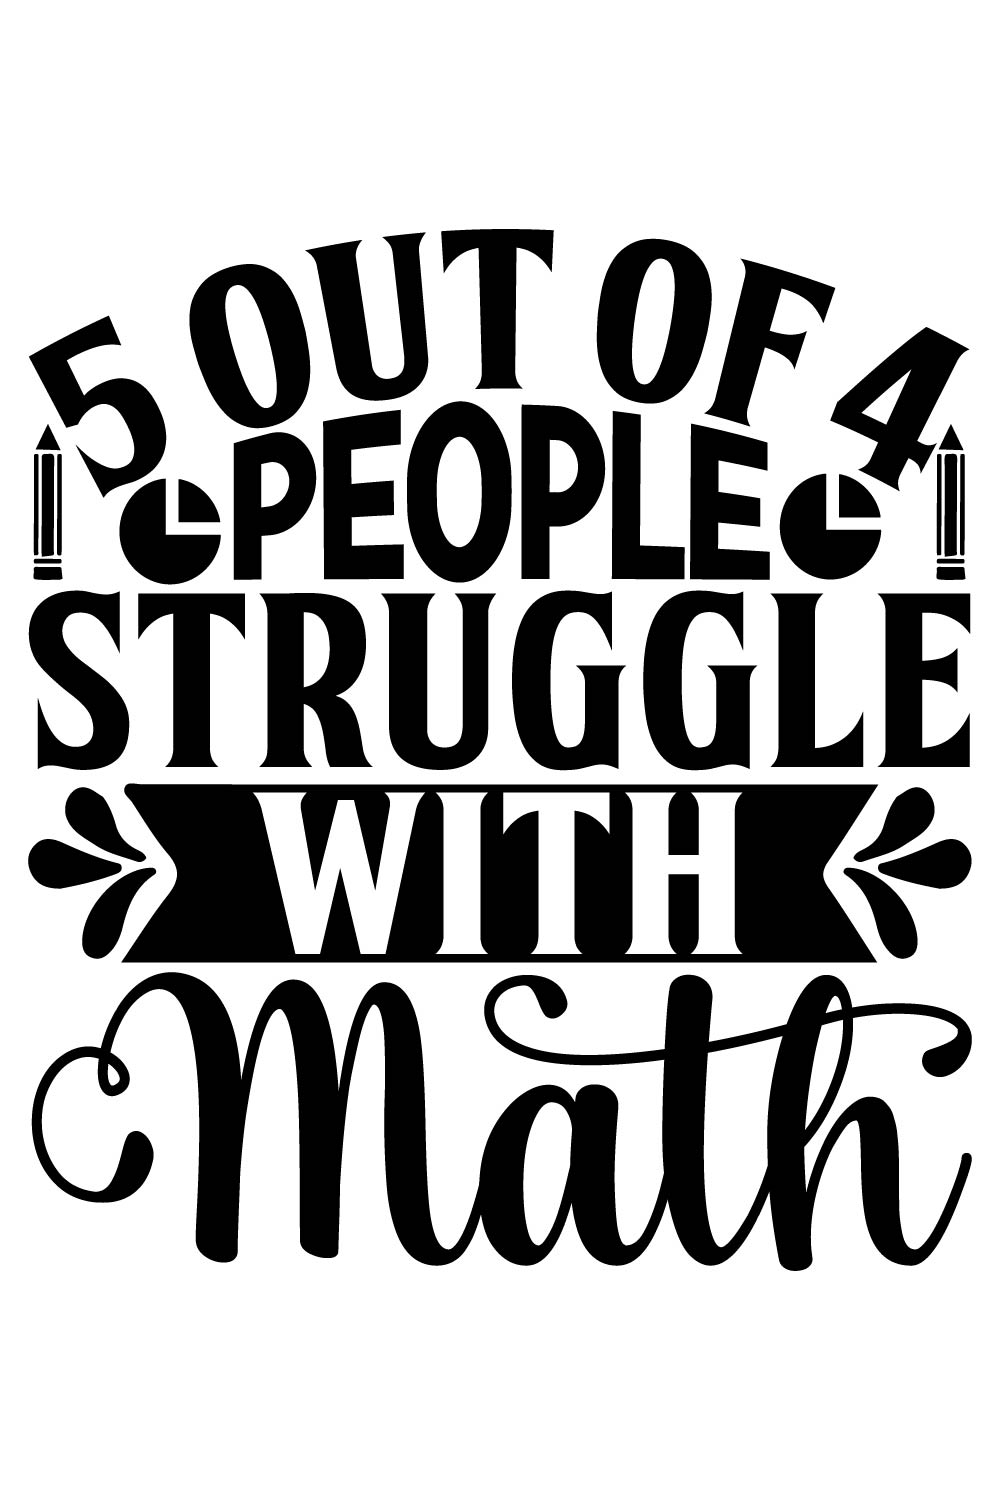 Image with a wonderful inscription 5 out of 4 people struggle with math.